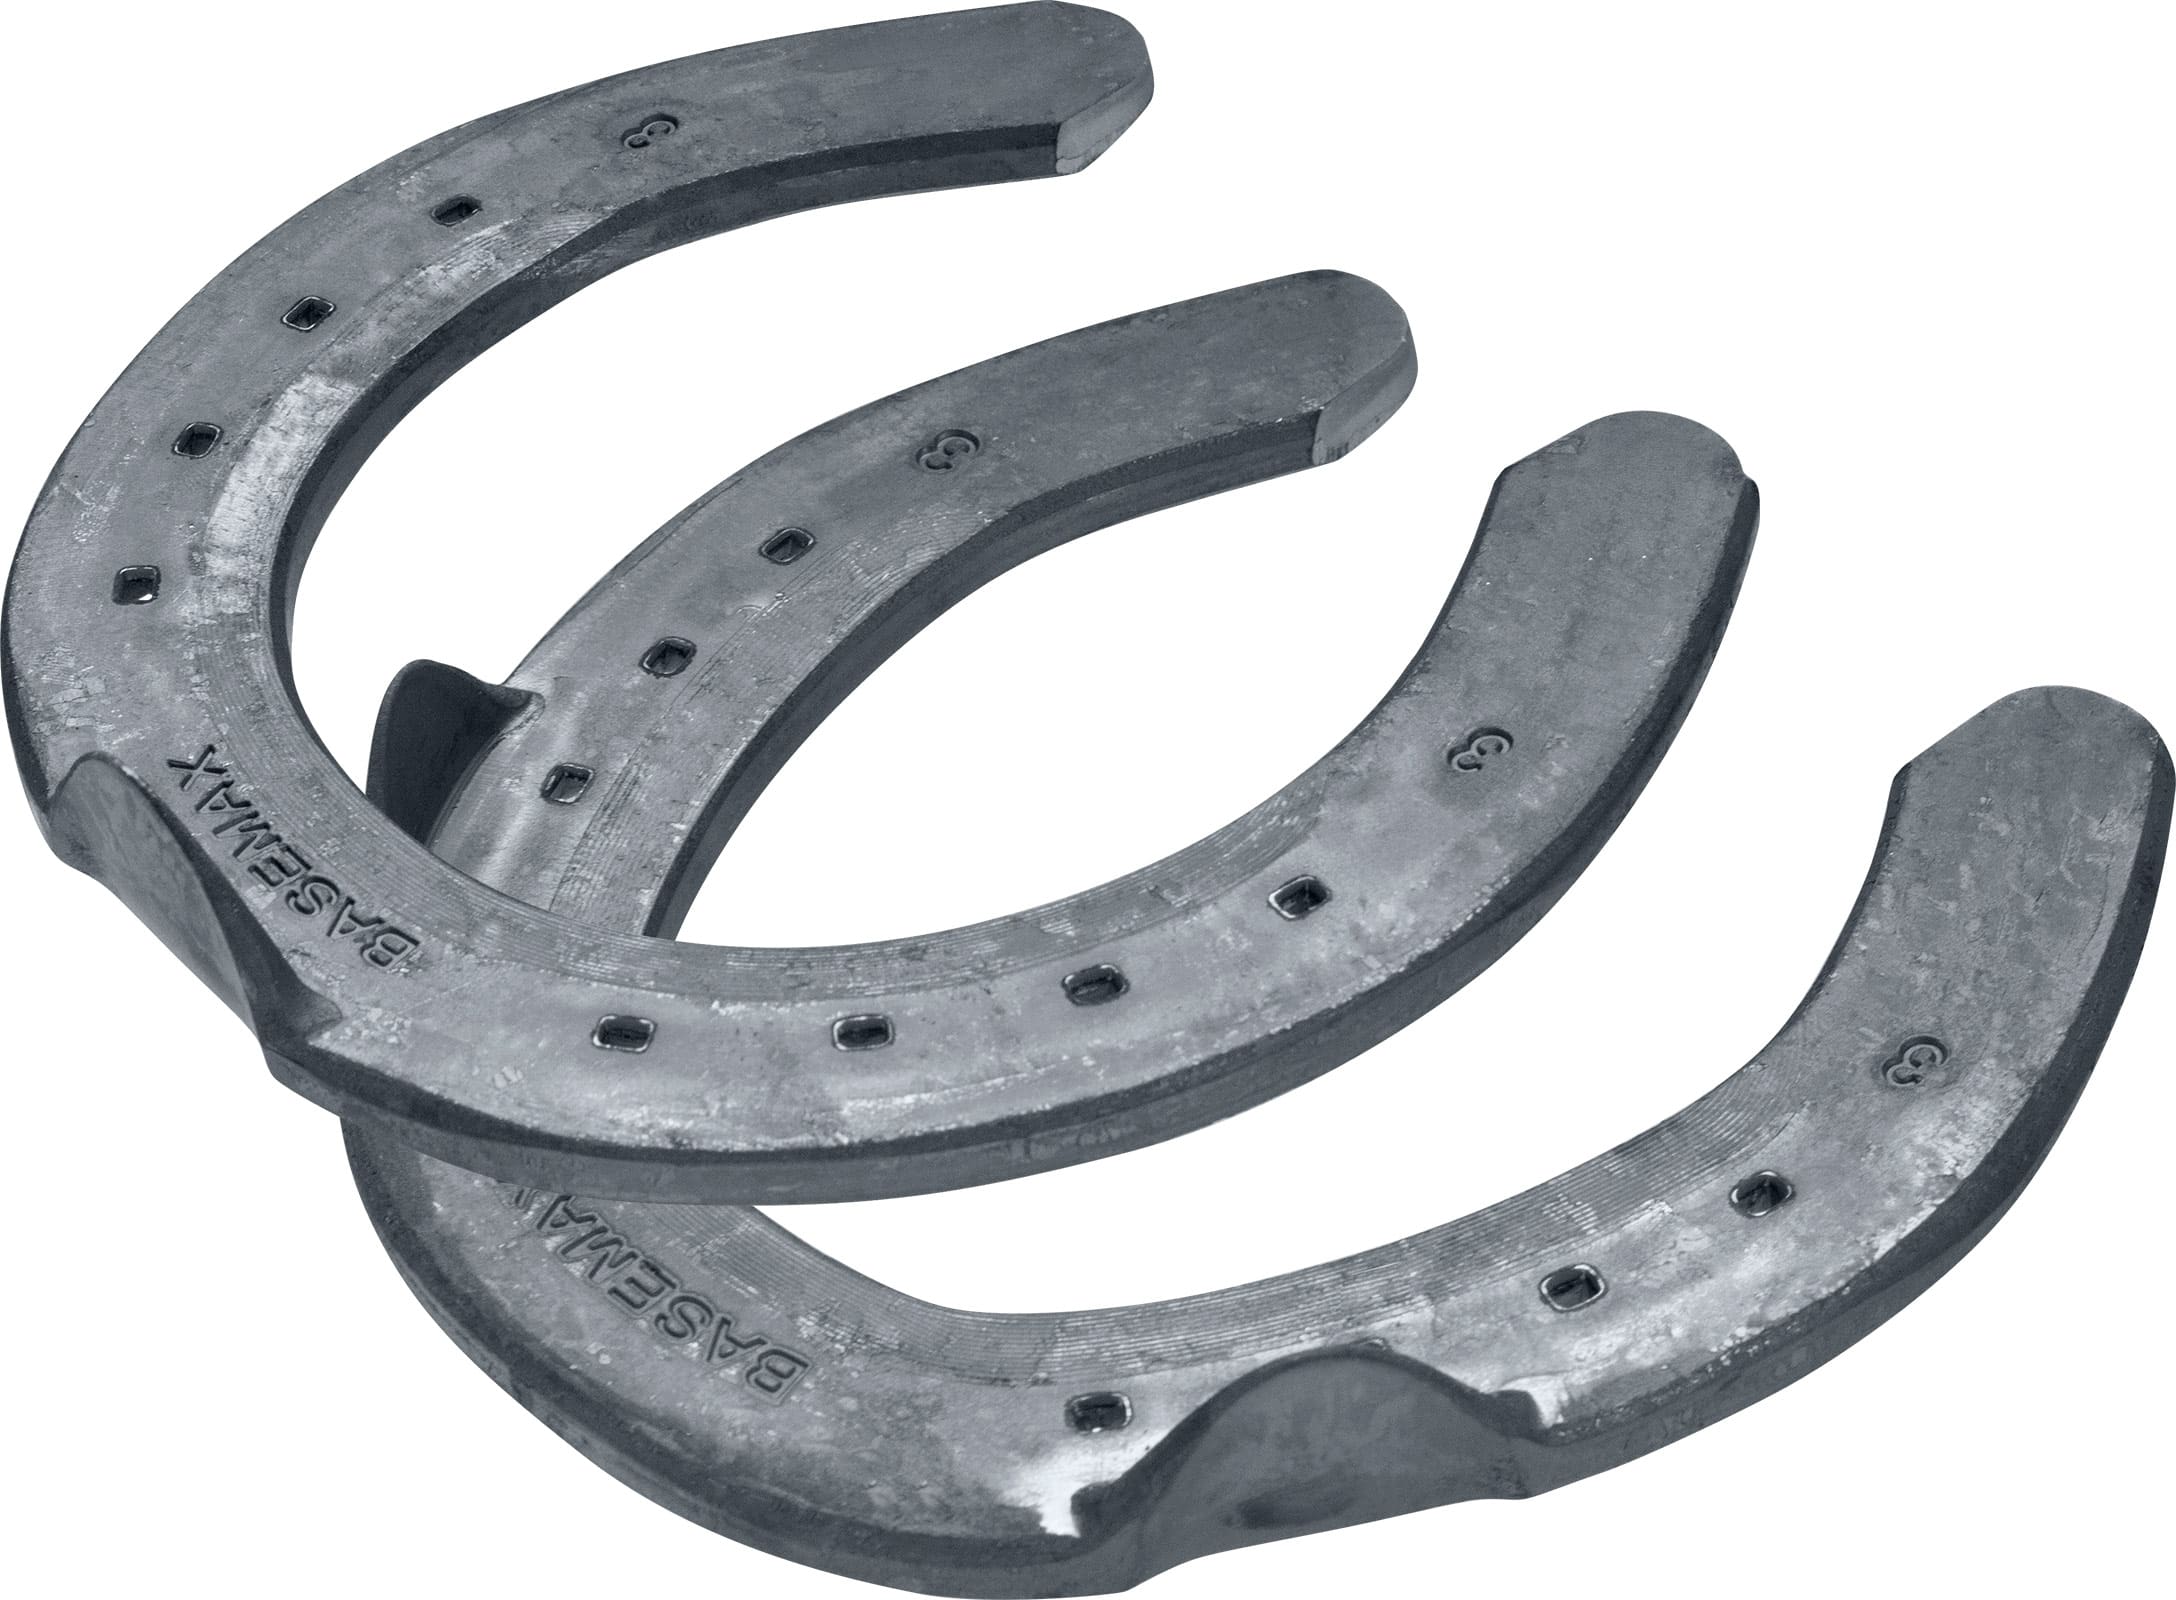 Mustad BaseMax horseshoes, front and hind, 3D top view